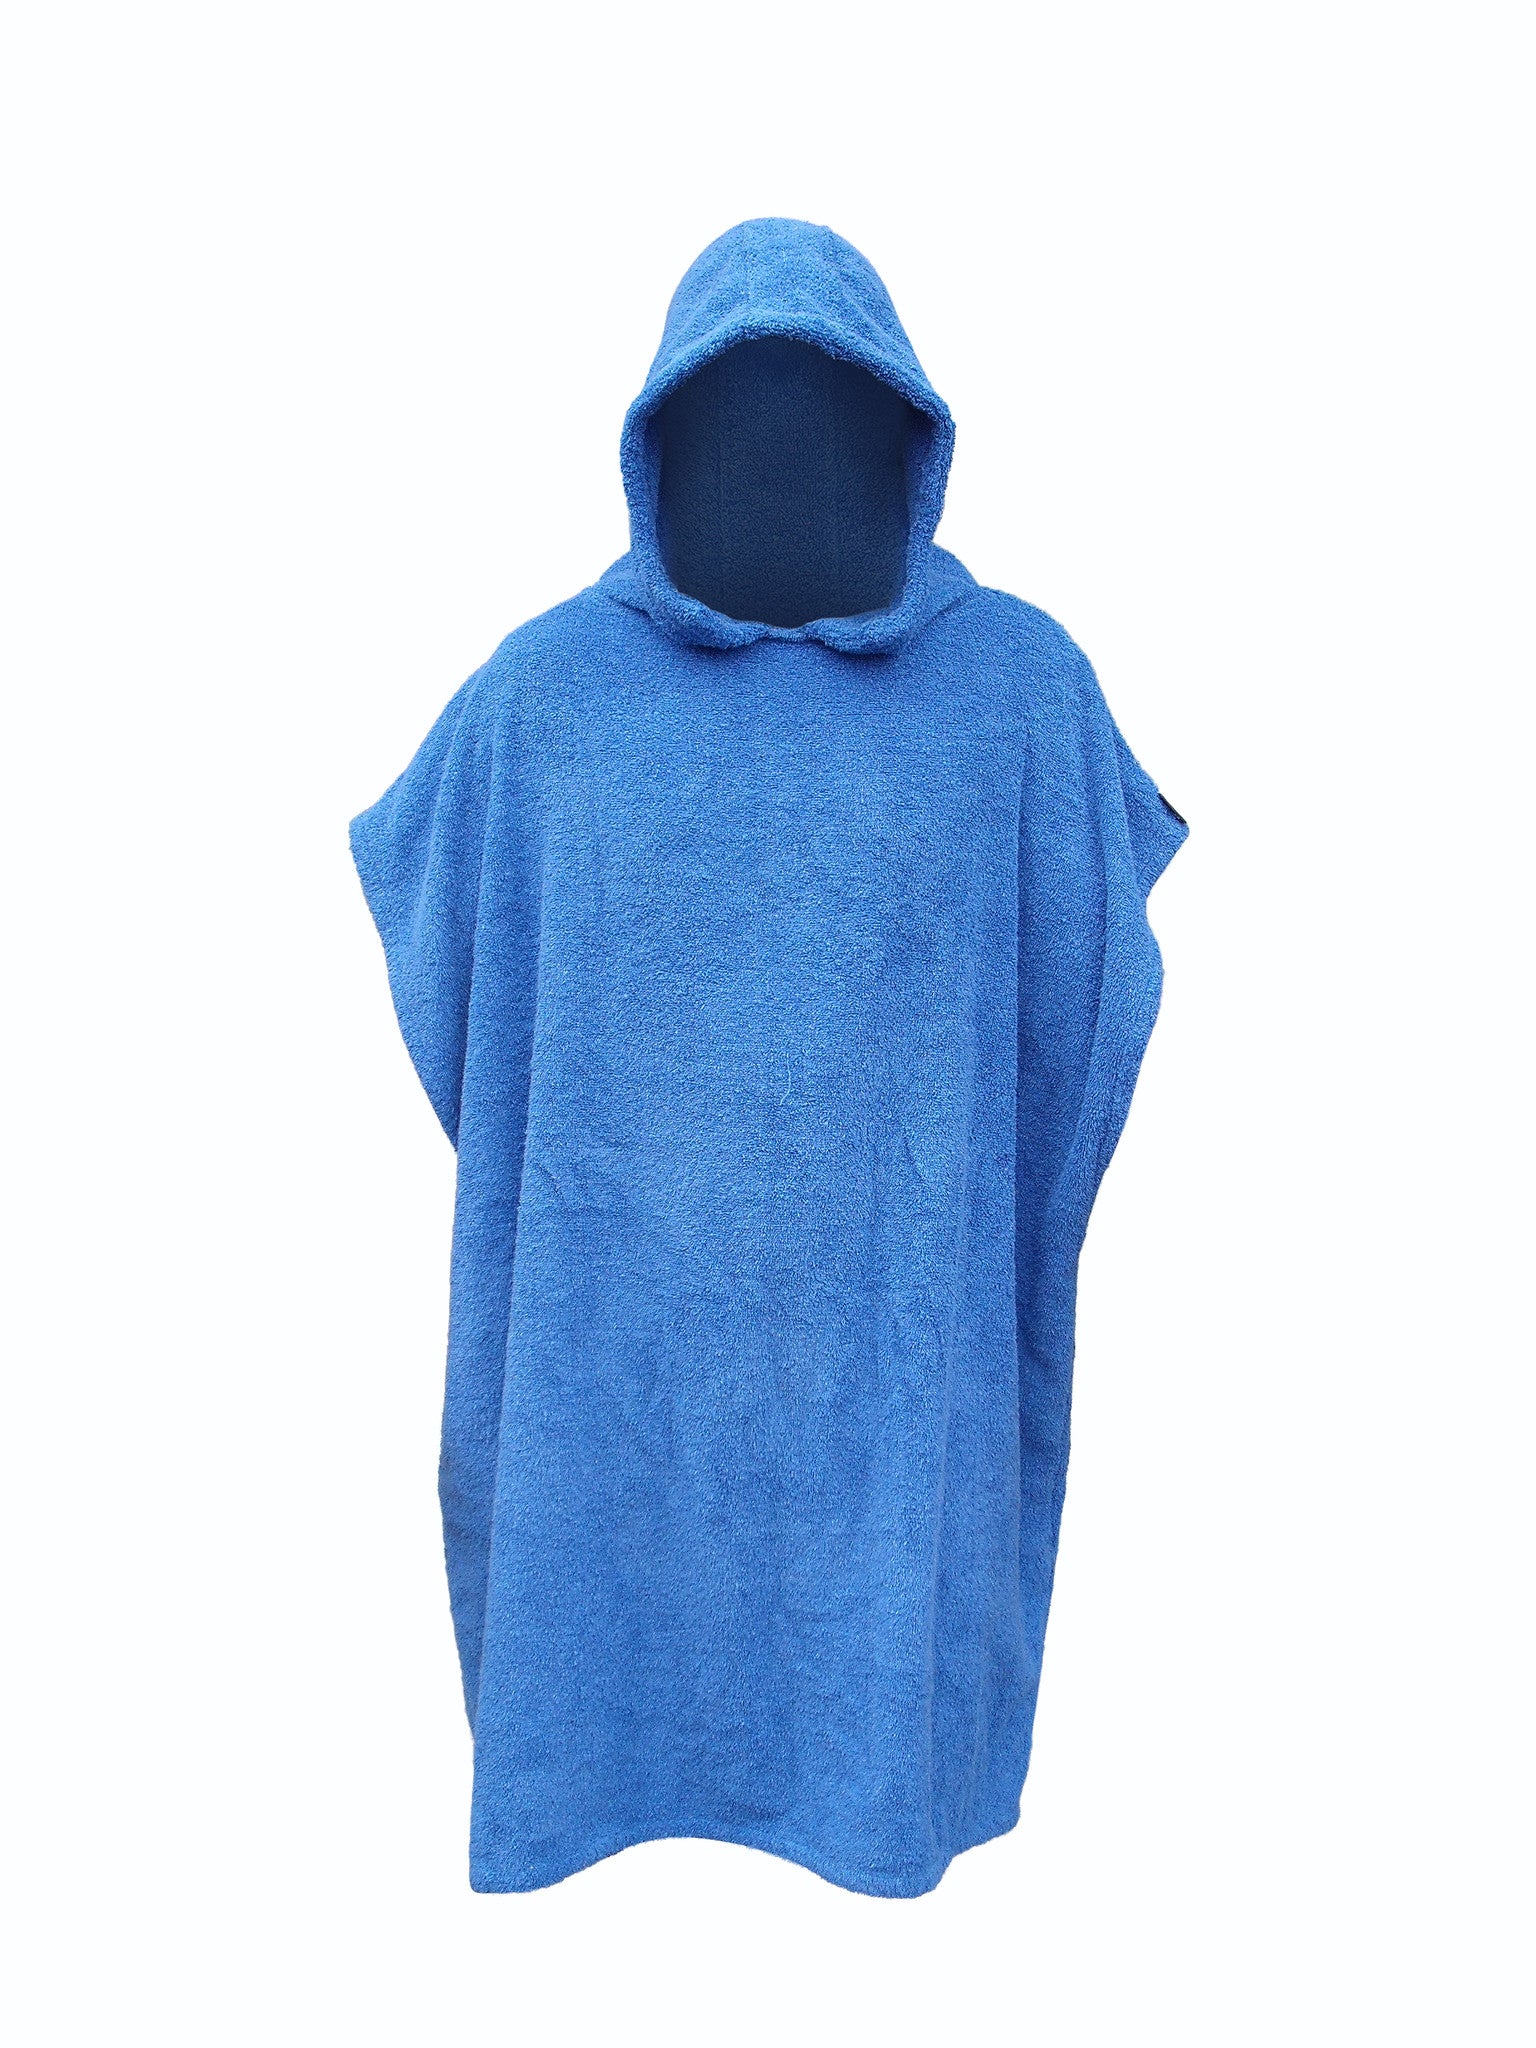 Poncho Towel Changing Robes, Swim and Surf